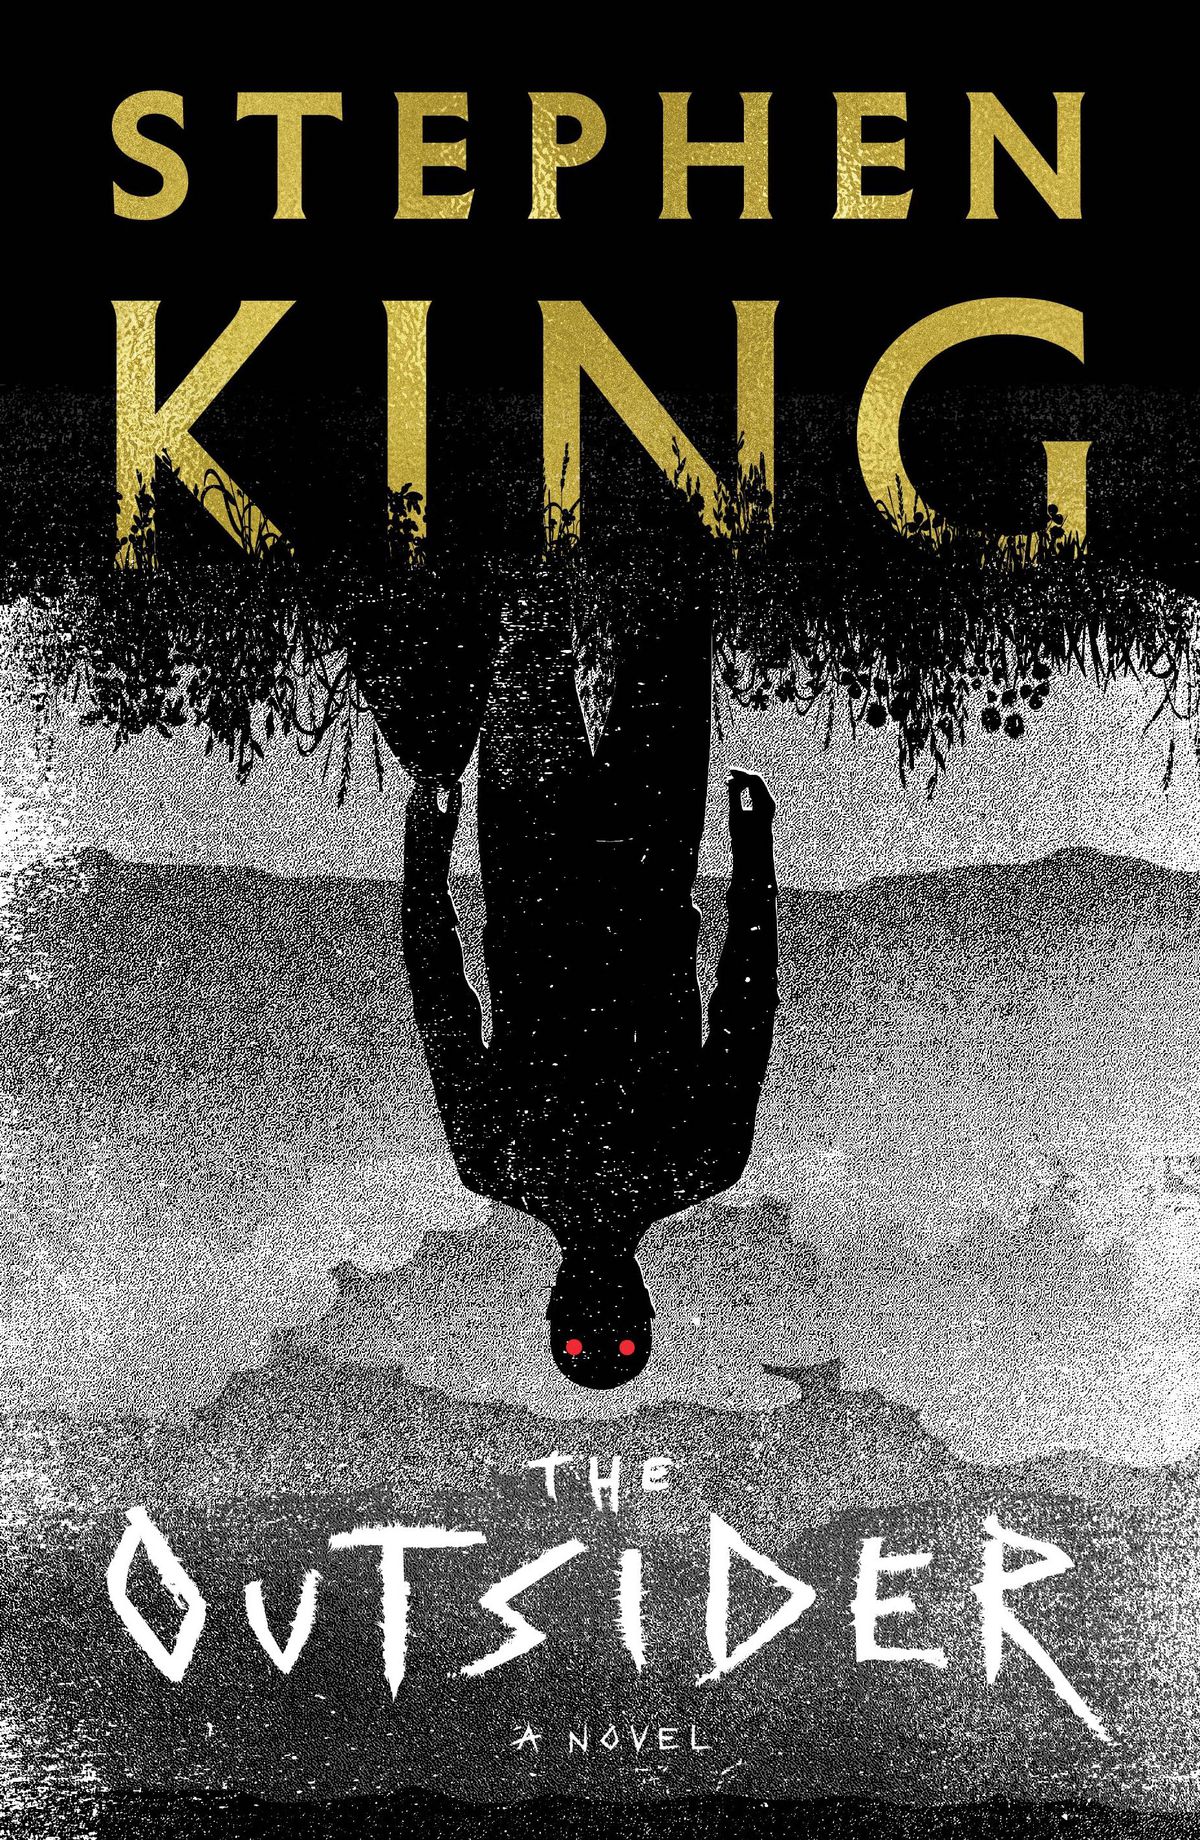 A cover for Stephen King’s novel The Outsider, showing an upside-down, mostly black-and-white image of a stylized human silhouette standing in a silhouetted field, with glowing red eyes